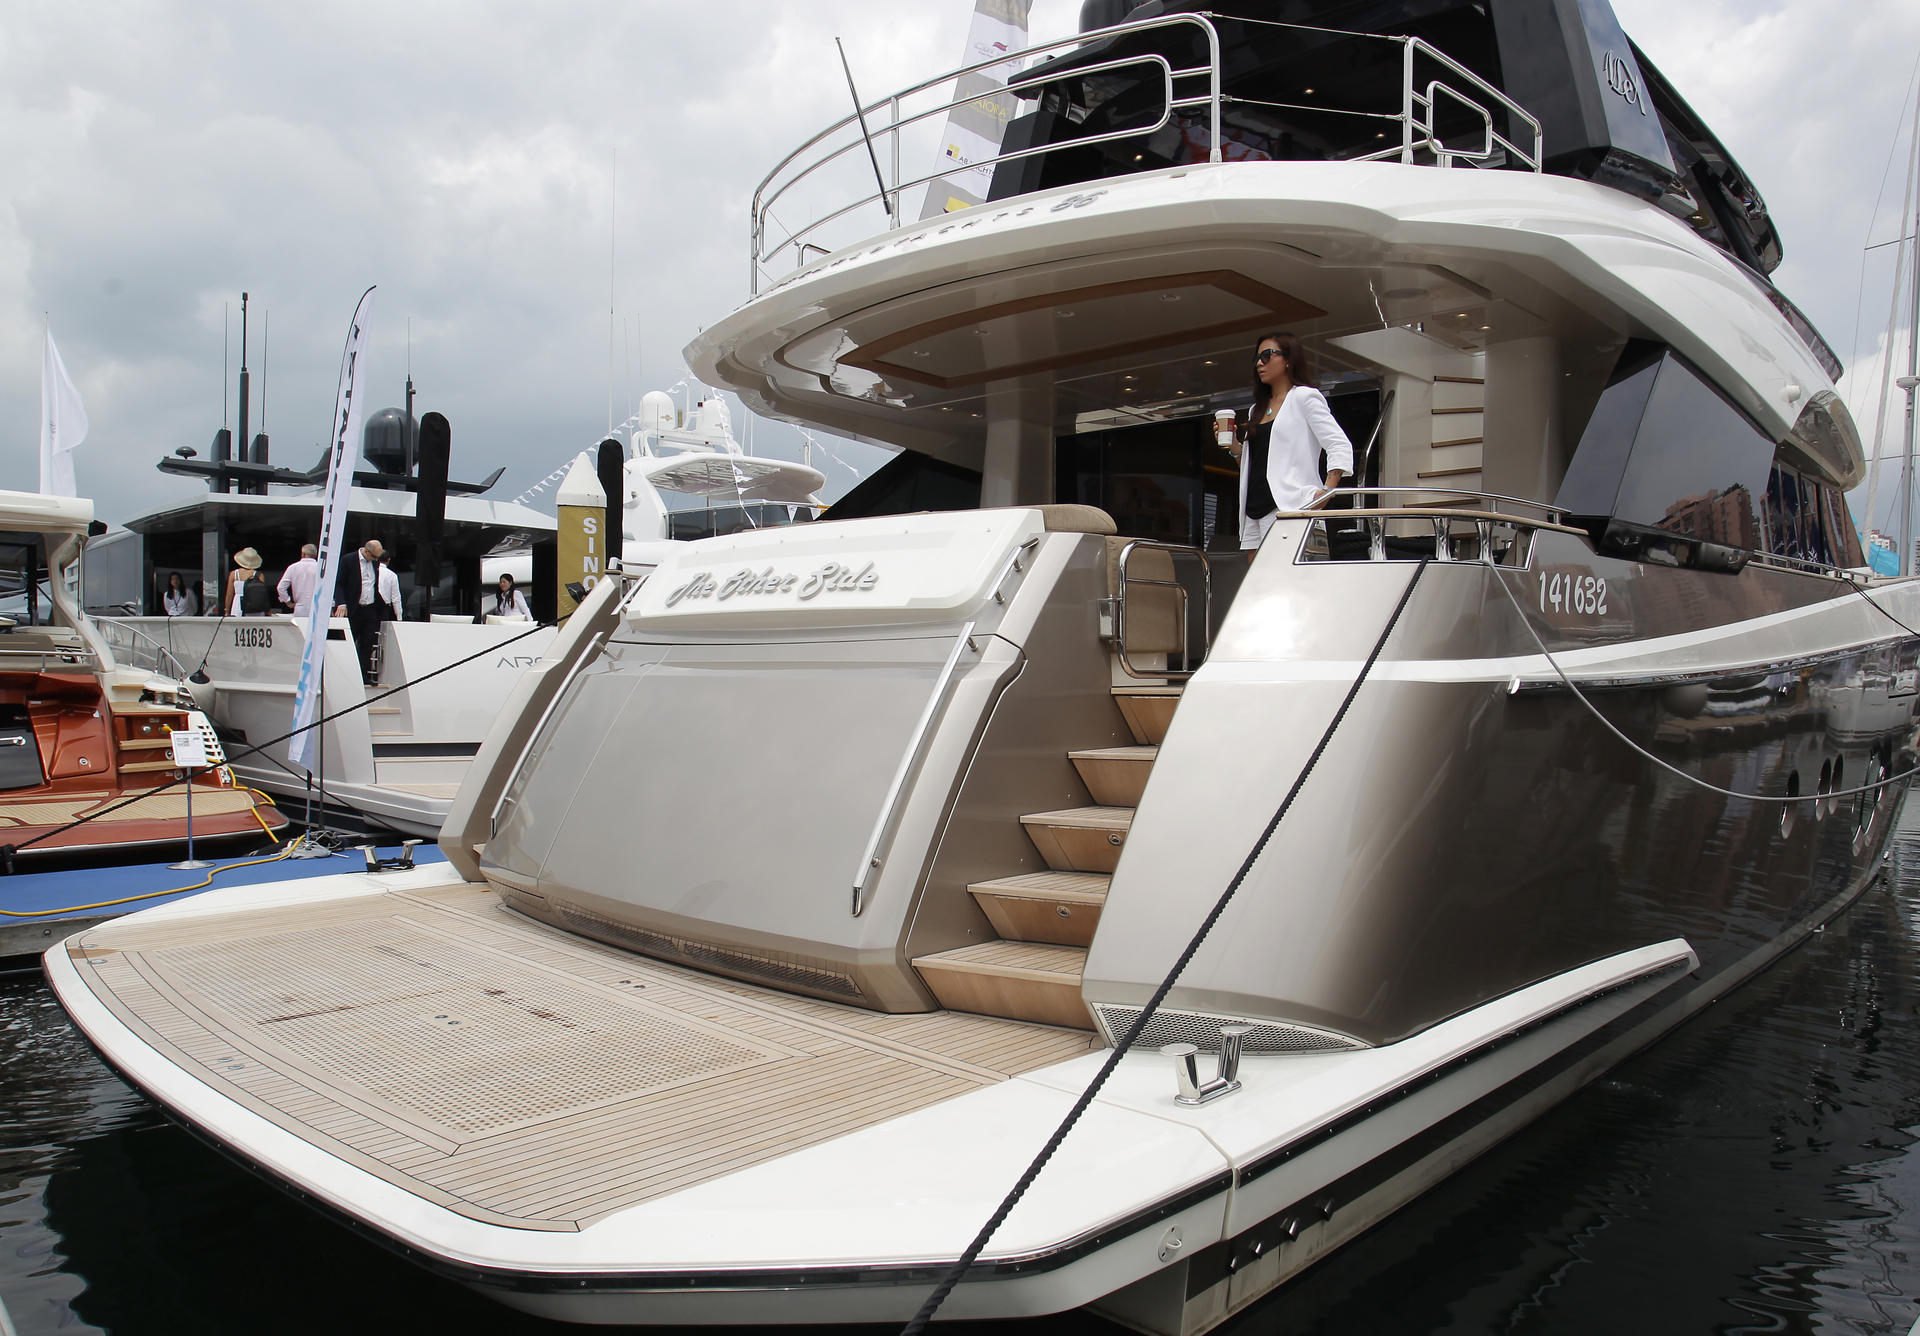 The MCY 86 is one of 70 vessels at the show. Photo: Dickson Lee